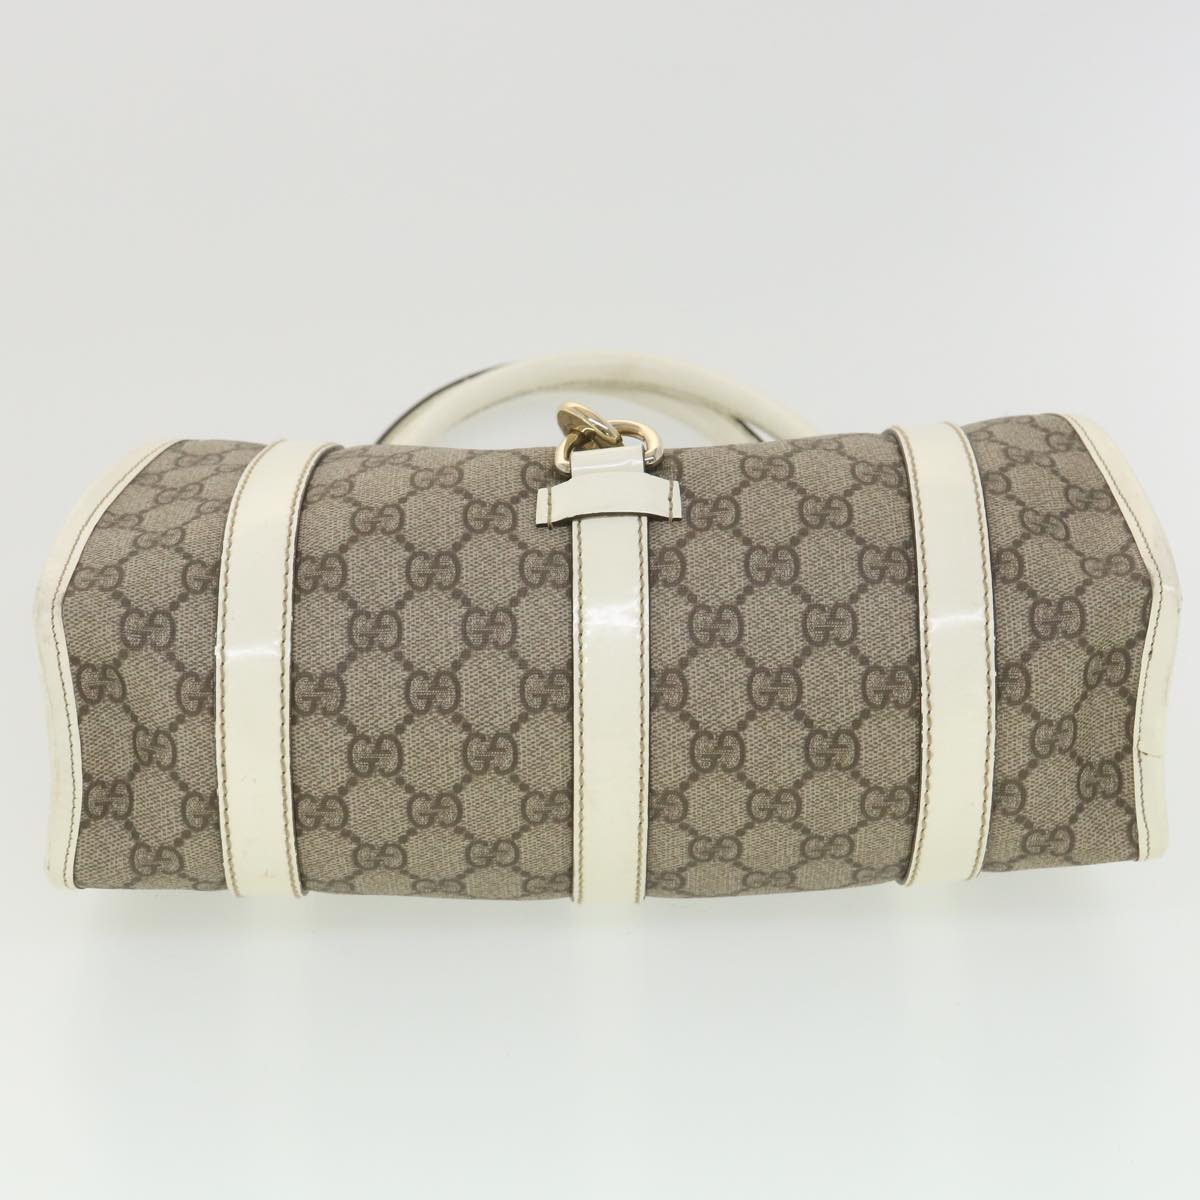 GUCCI GG Supreme Hand Bag PVC Leather Beige 203495 Auth 38280